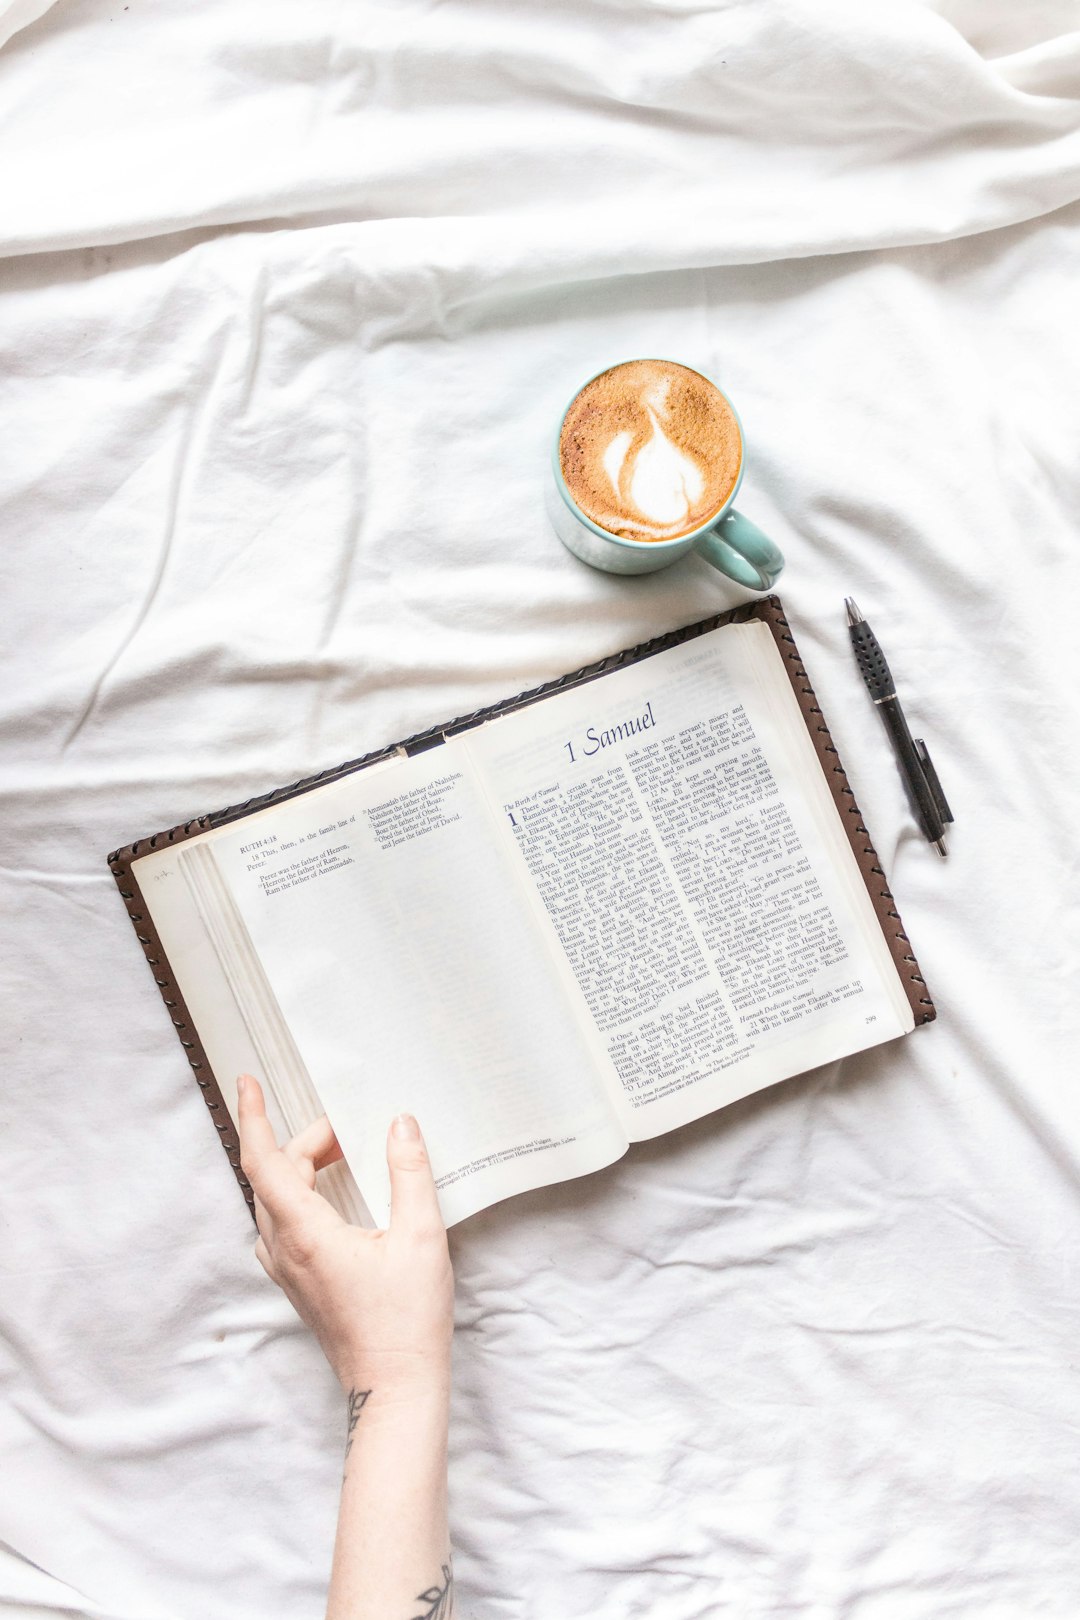 person holding white book page beside black click pen and white ceramic mug on white textile